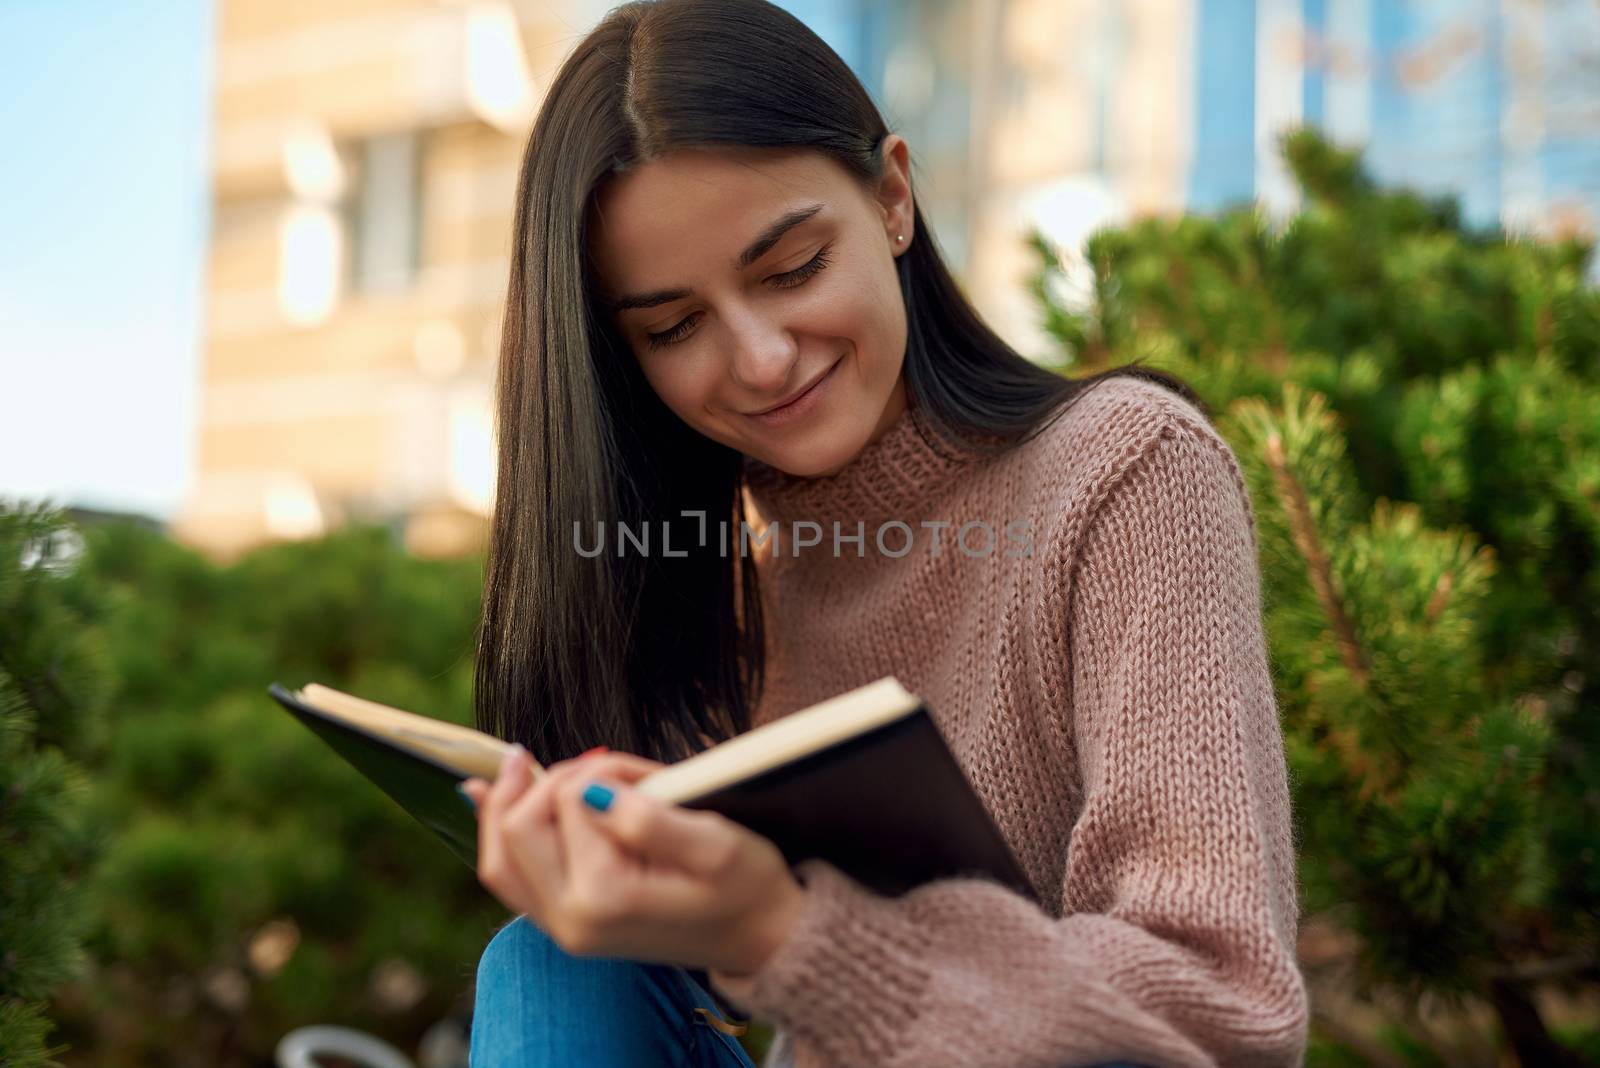 Smiling lady reading personal journal on the street by monakoartstudio